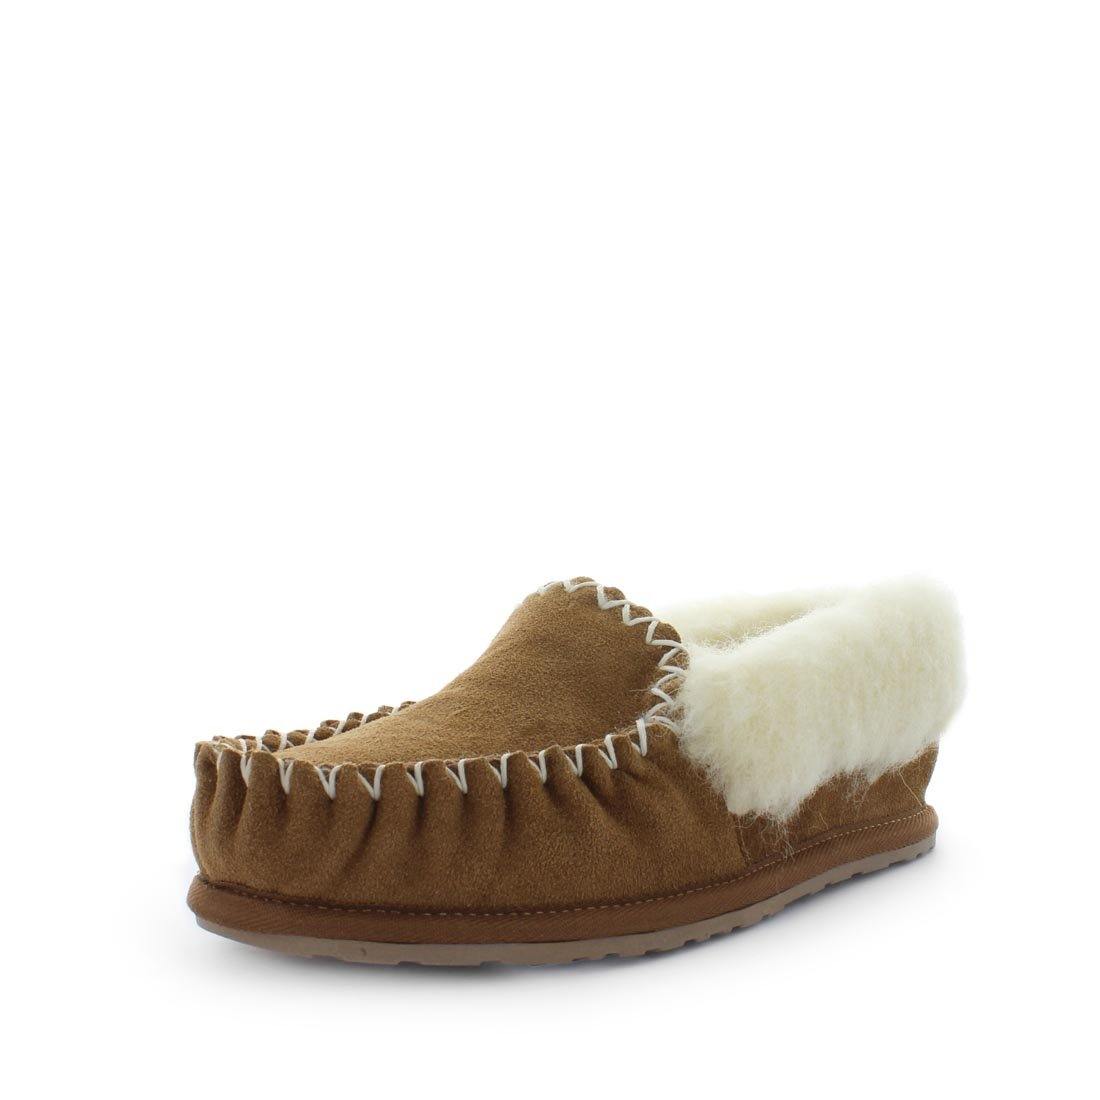 Just Bee UGGs- crafts - womens moccasins slipper style, 100% wool, leather shoe with detailed upper and over hanging wool on the trim - womens comfort slippers - womens best slippers- UGGs (4865771208783)